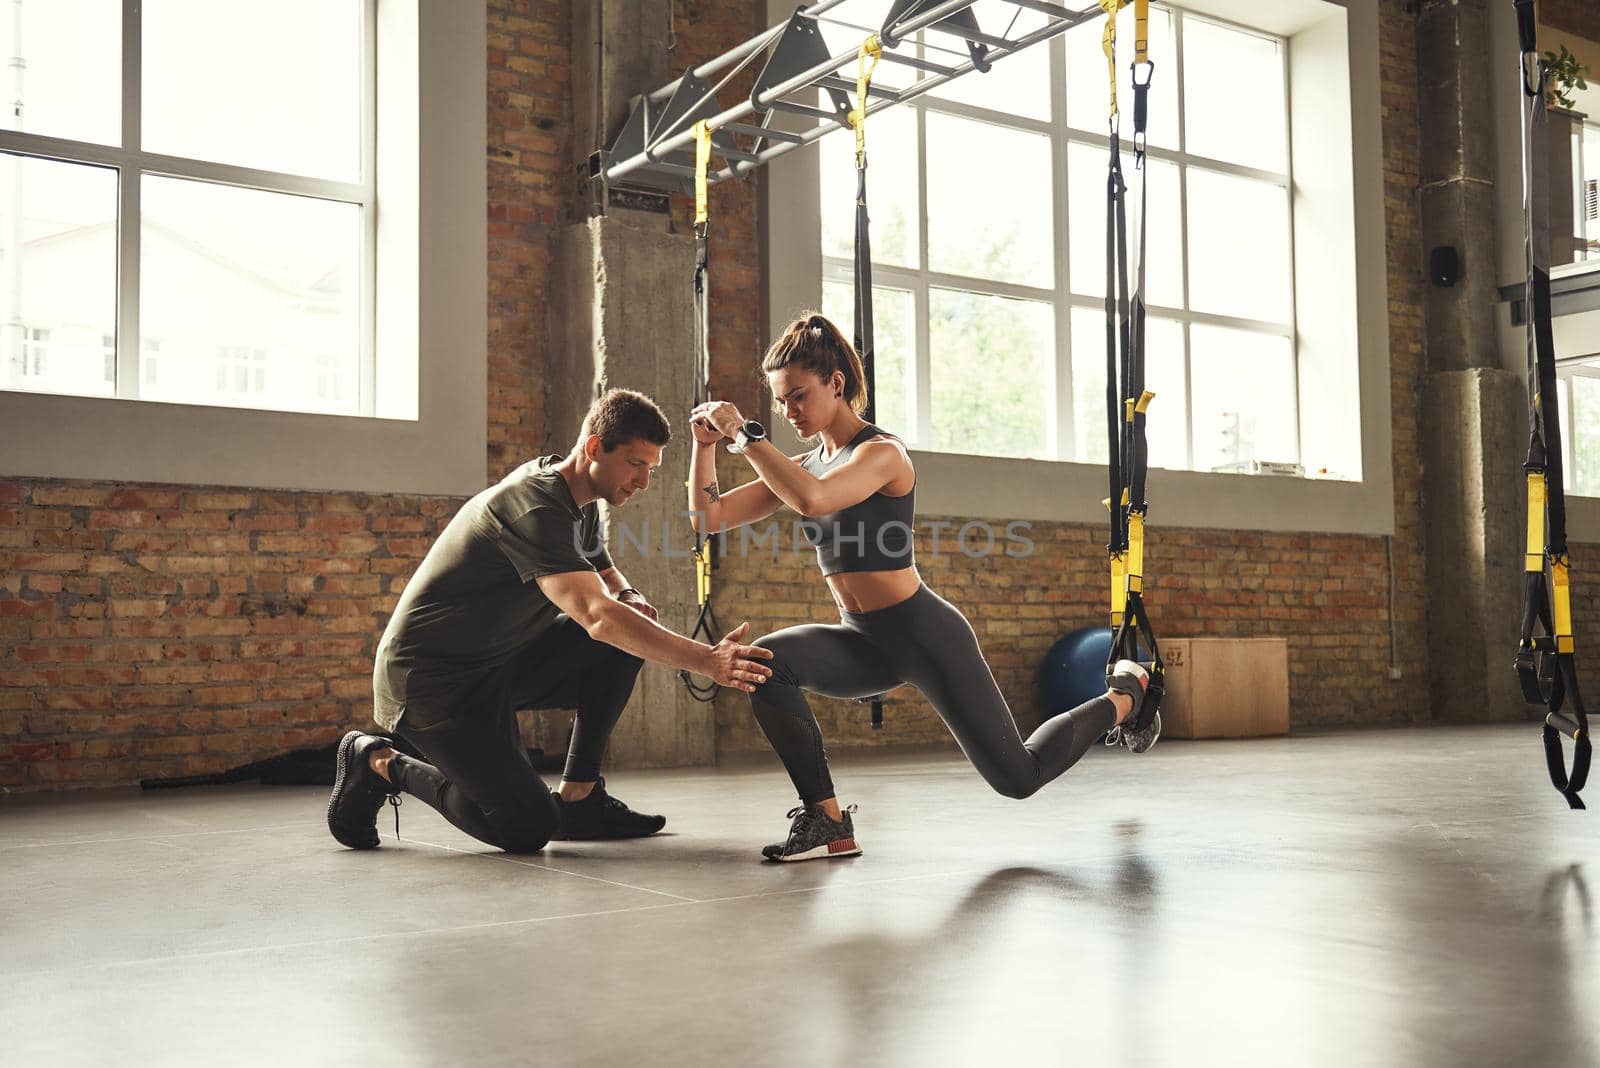 Doing squat exercise. Confident young personal trainer is showing slim athletic woman how to do squats with Trx fitness straps while training at gym. by friendsstock